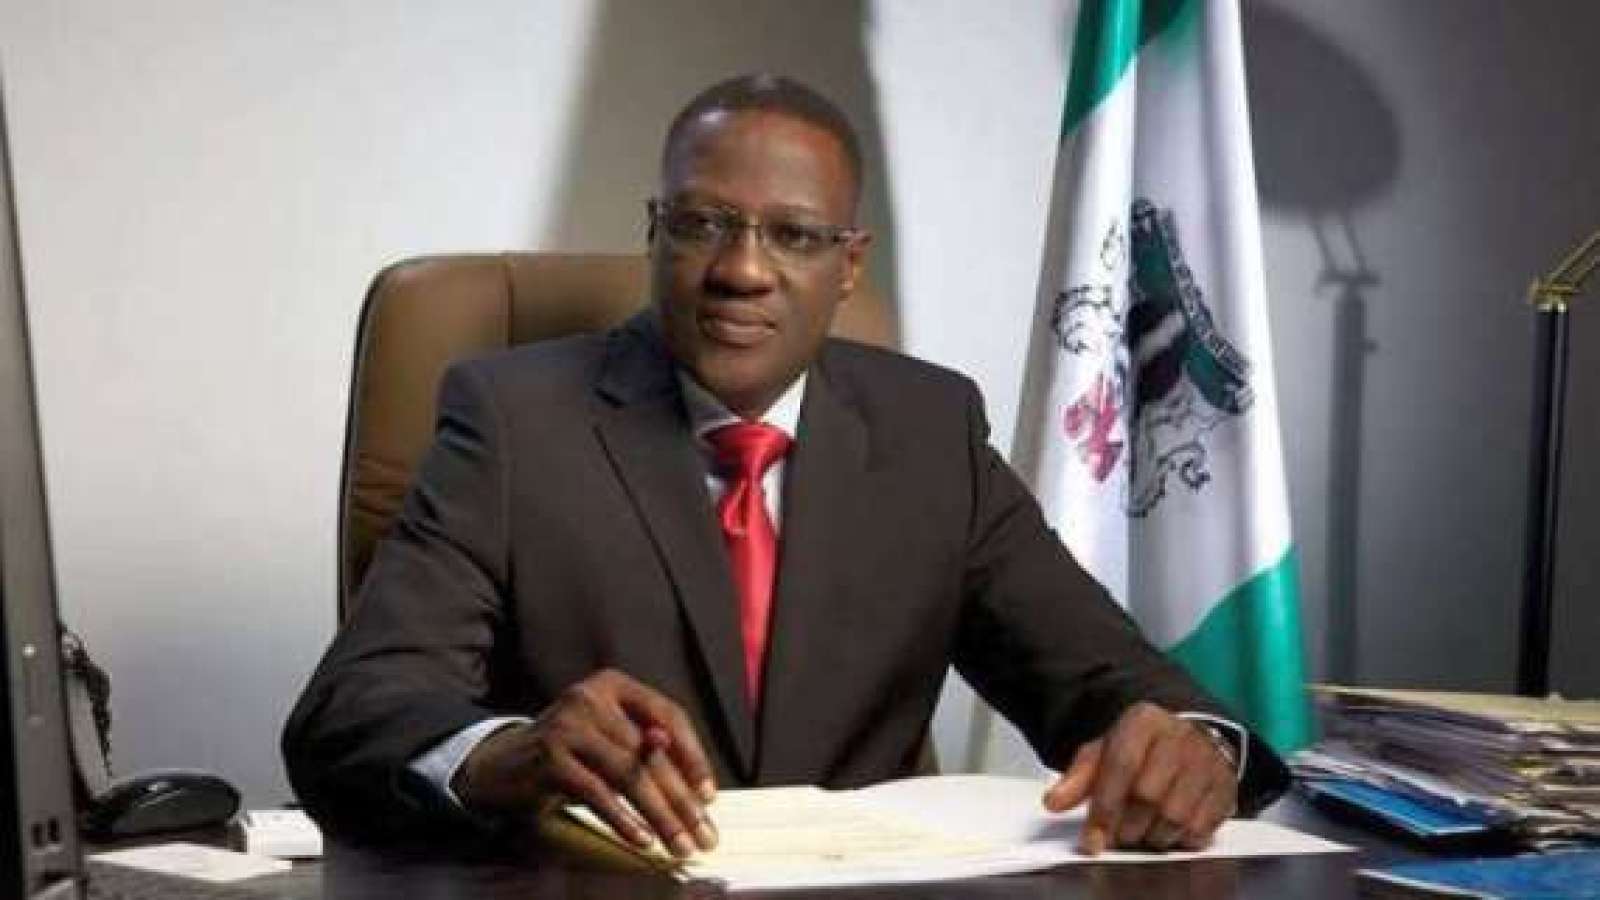 Kwara State Governor Ahmed approves minor cabinet reshuffle